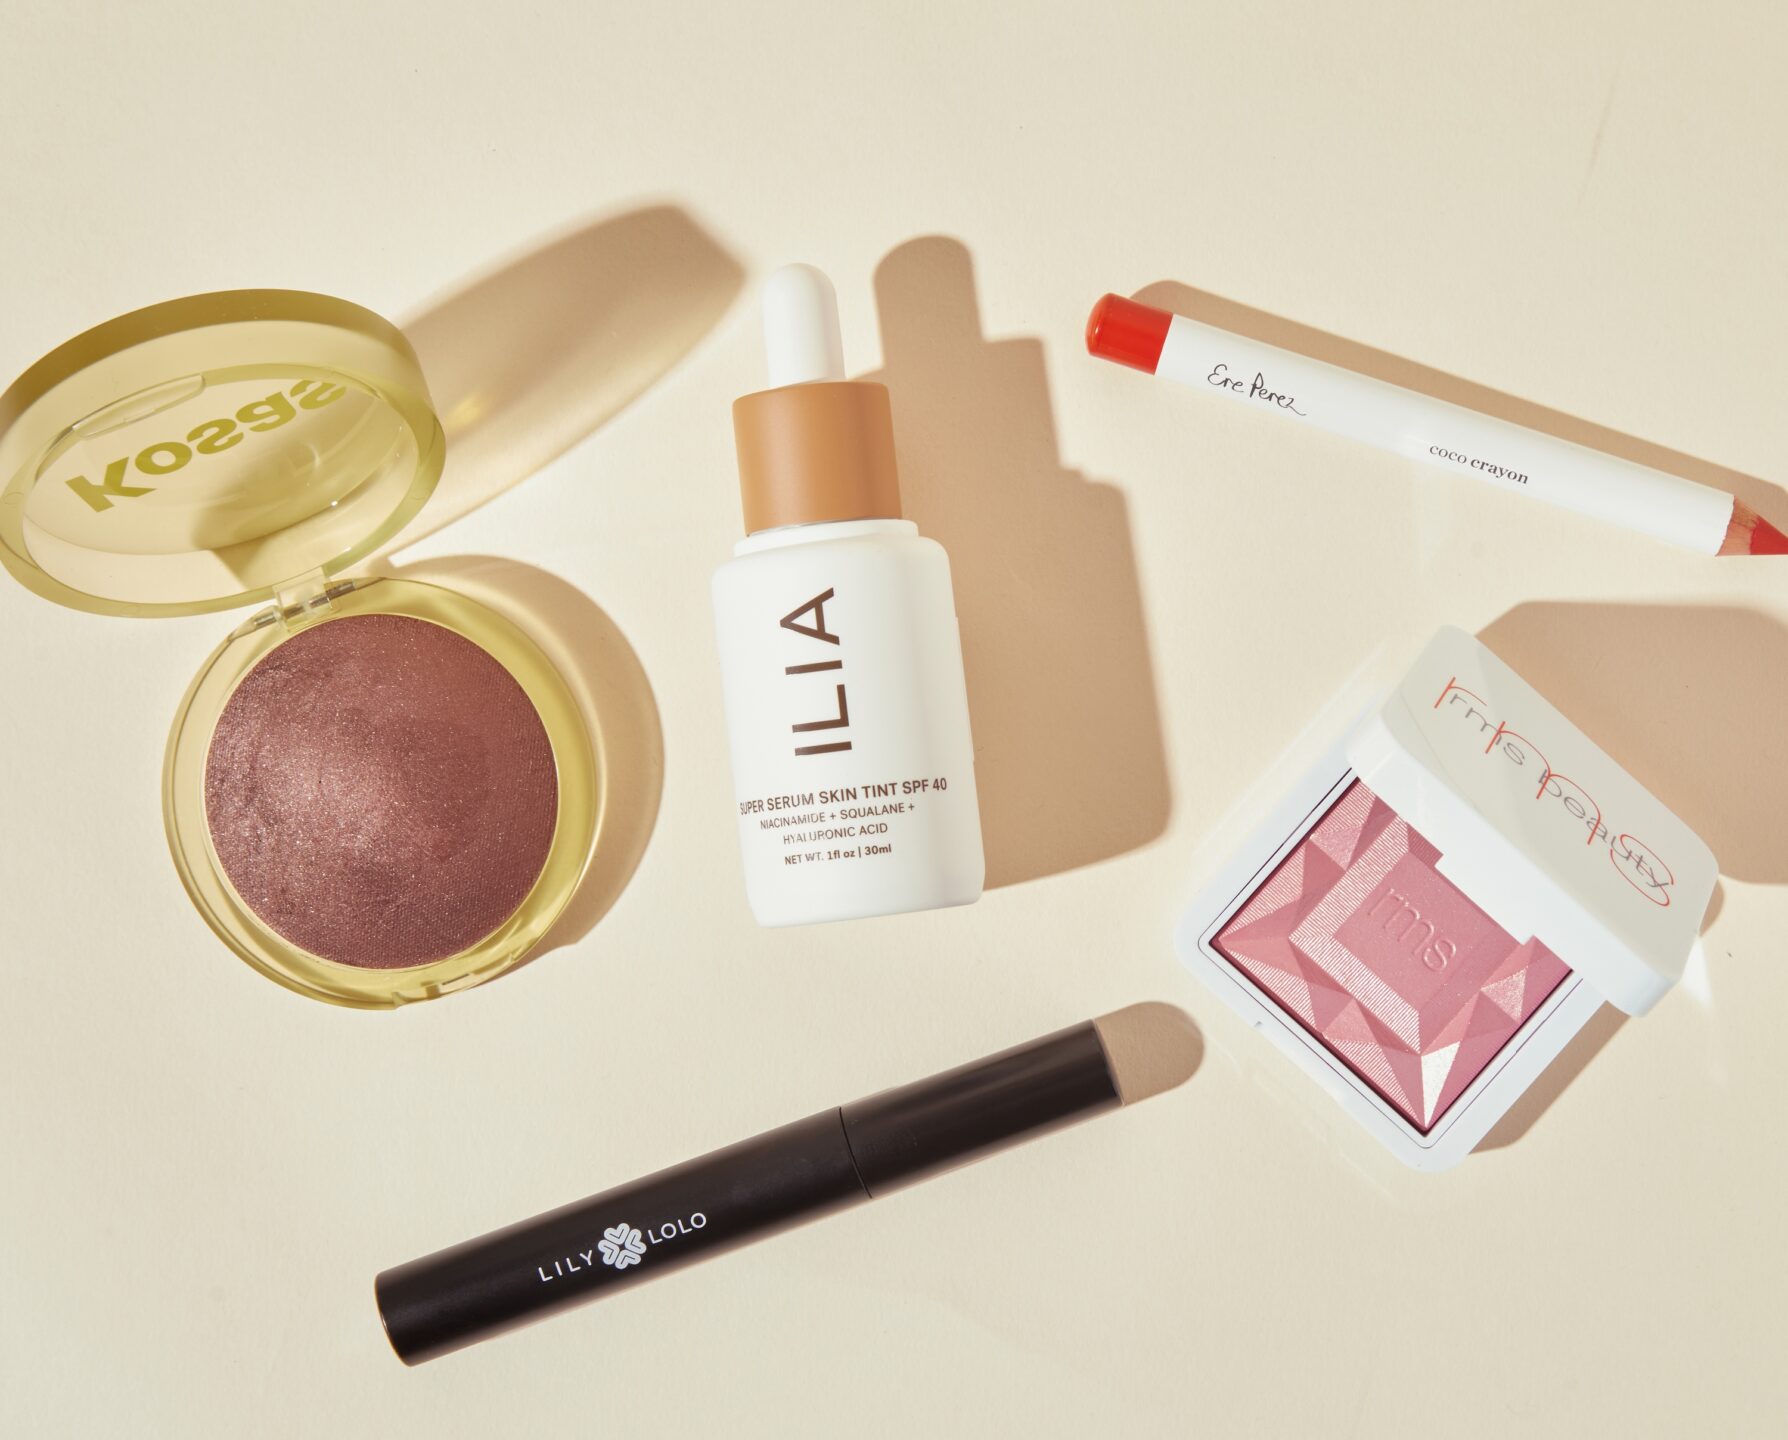 Clean beauty products